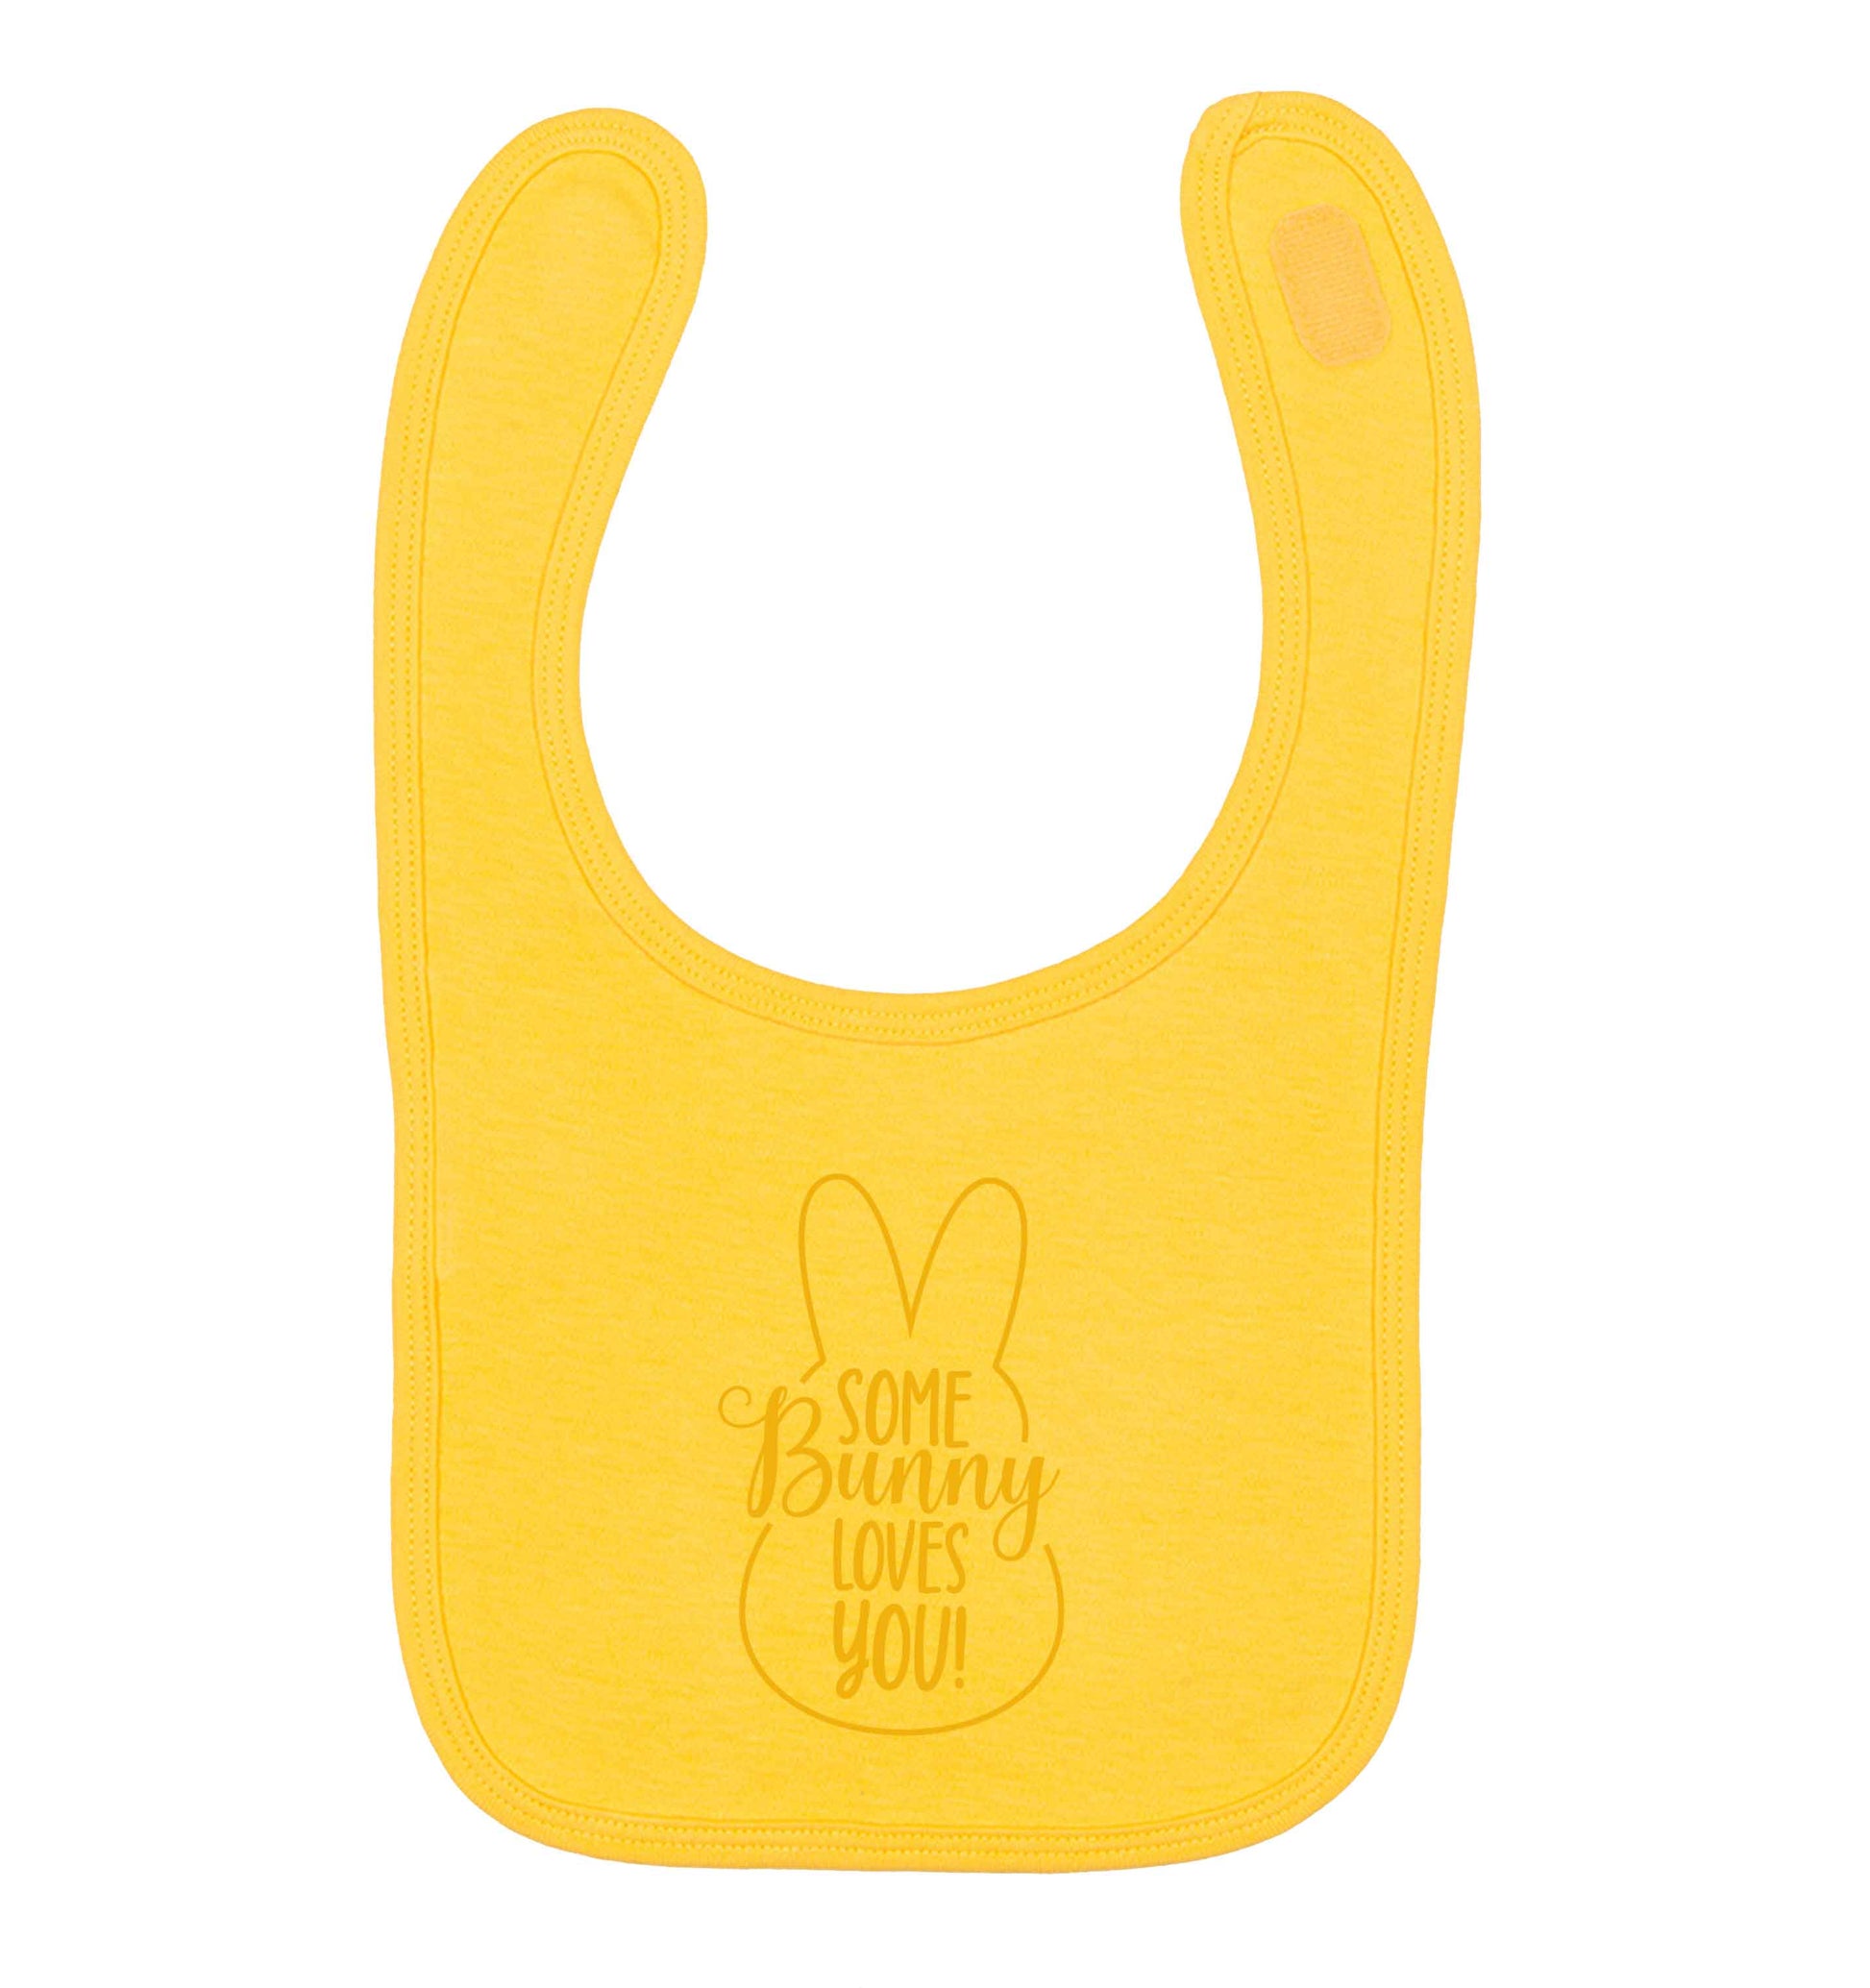 Some bunny loves you yellow baby bib